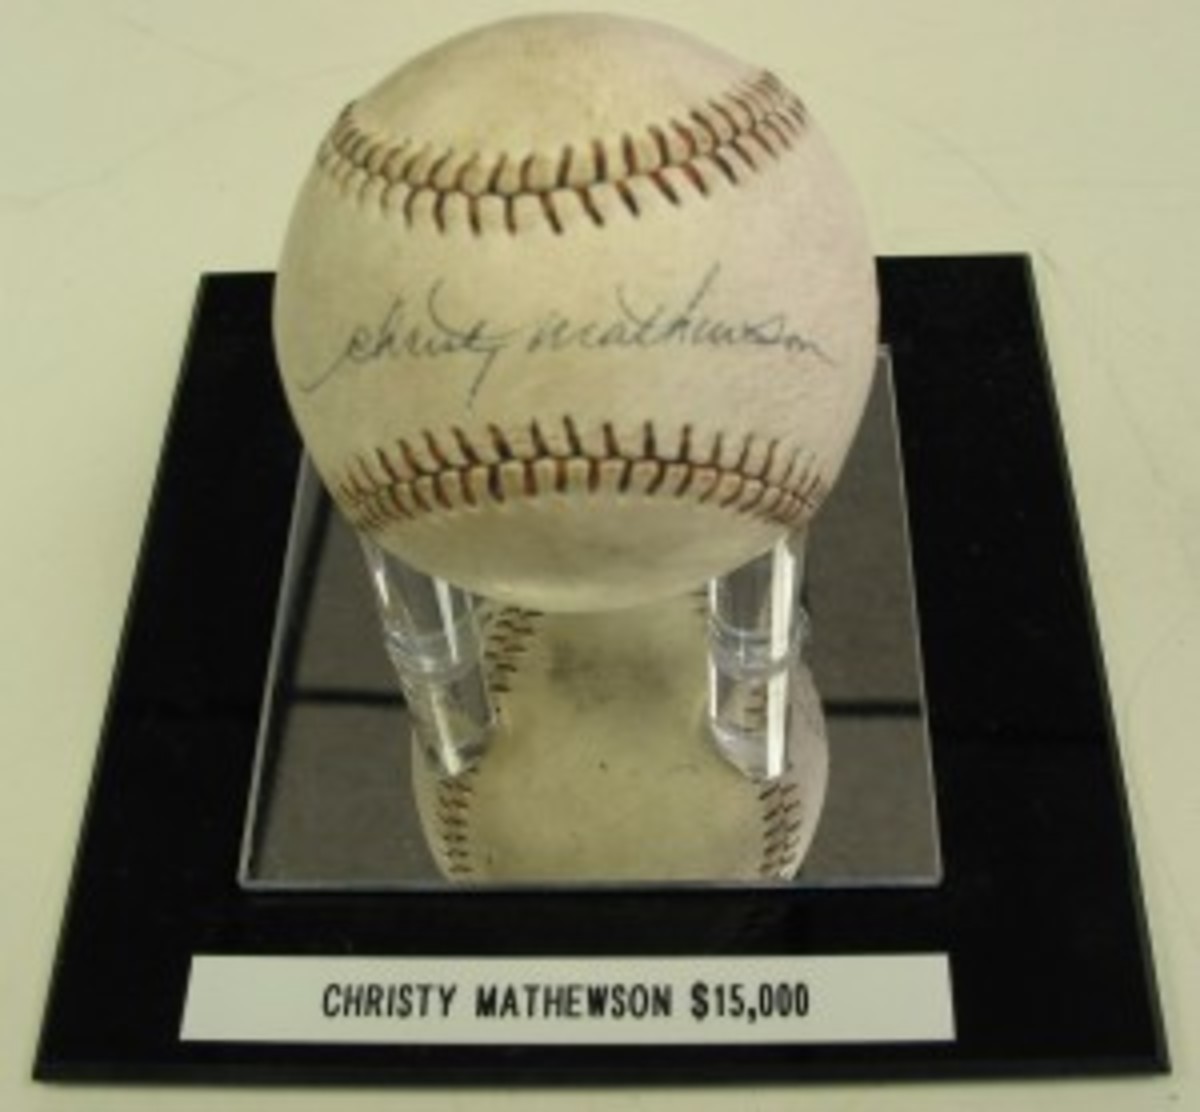 If the FBI hadn’t busted up the ring and confiscated this fake Christy Mathewson signed ball, some unsuspecting collector might have paid a lot of money for it.